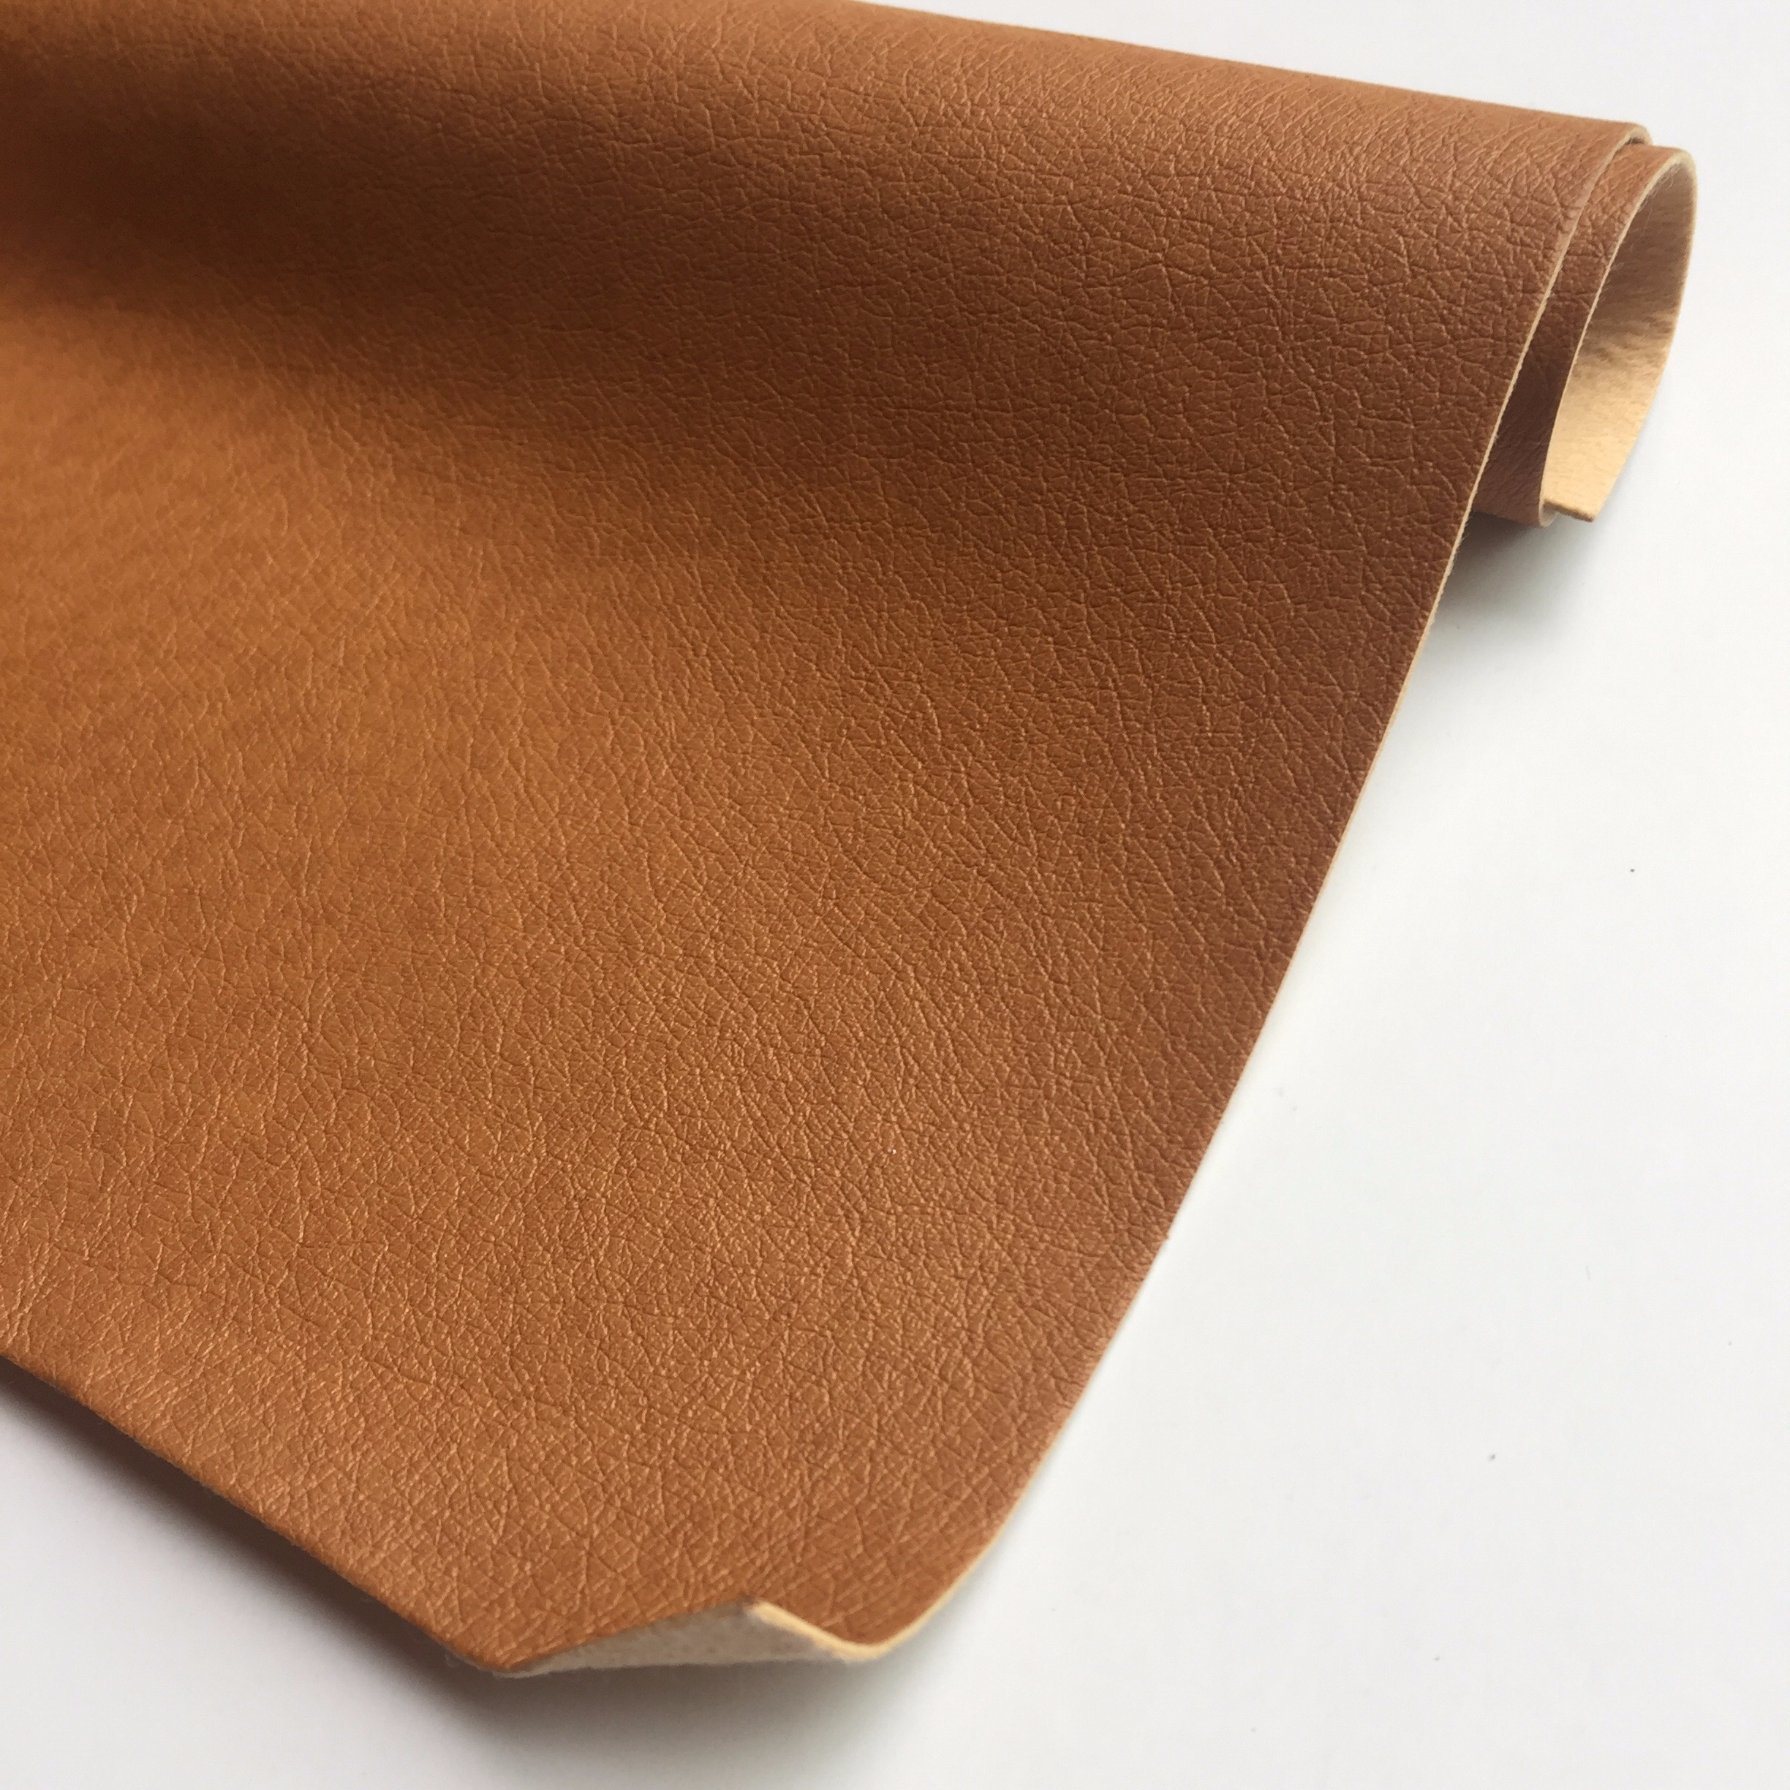 Pigskin Design PU Leather Breathable PU Lining Material